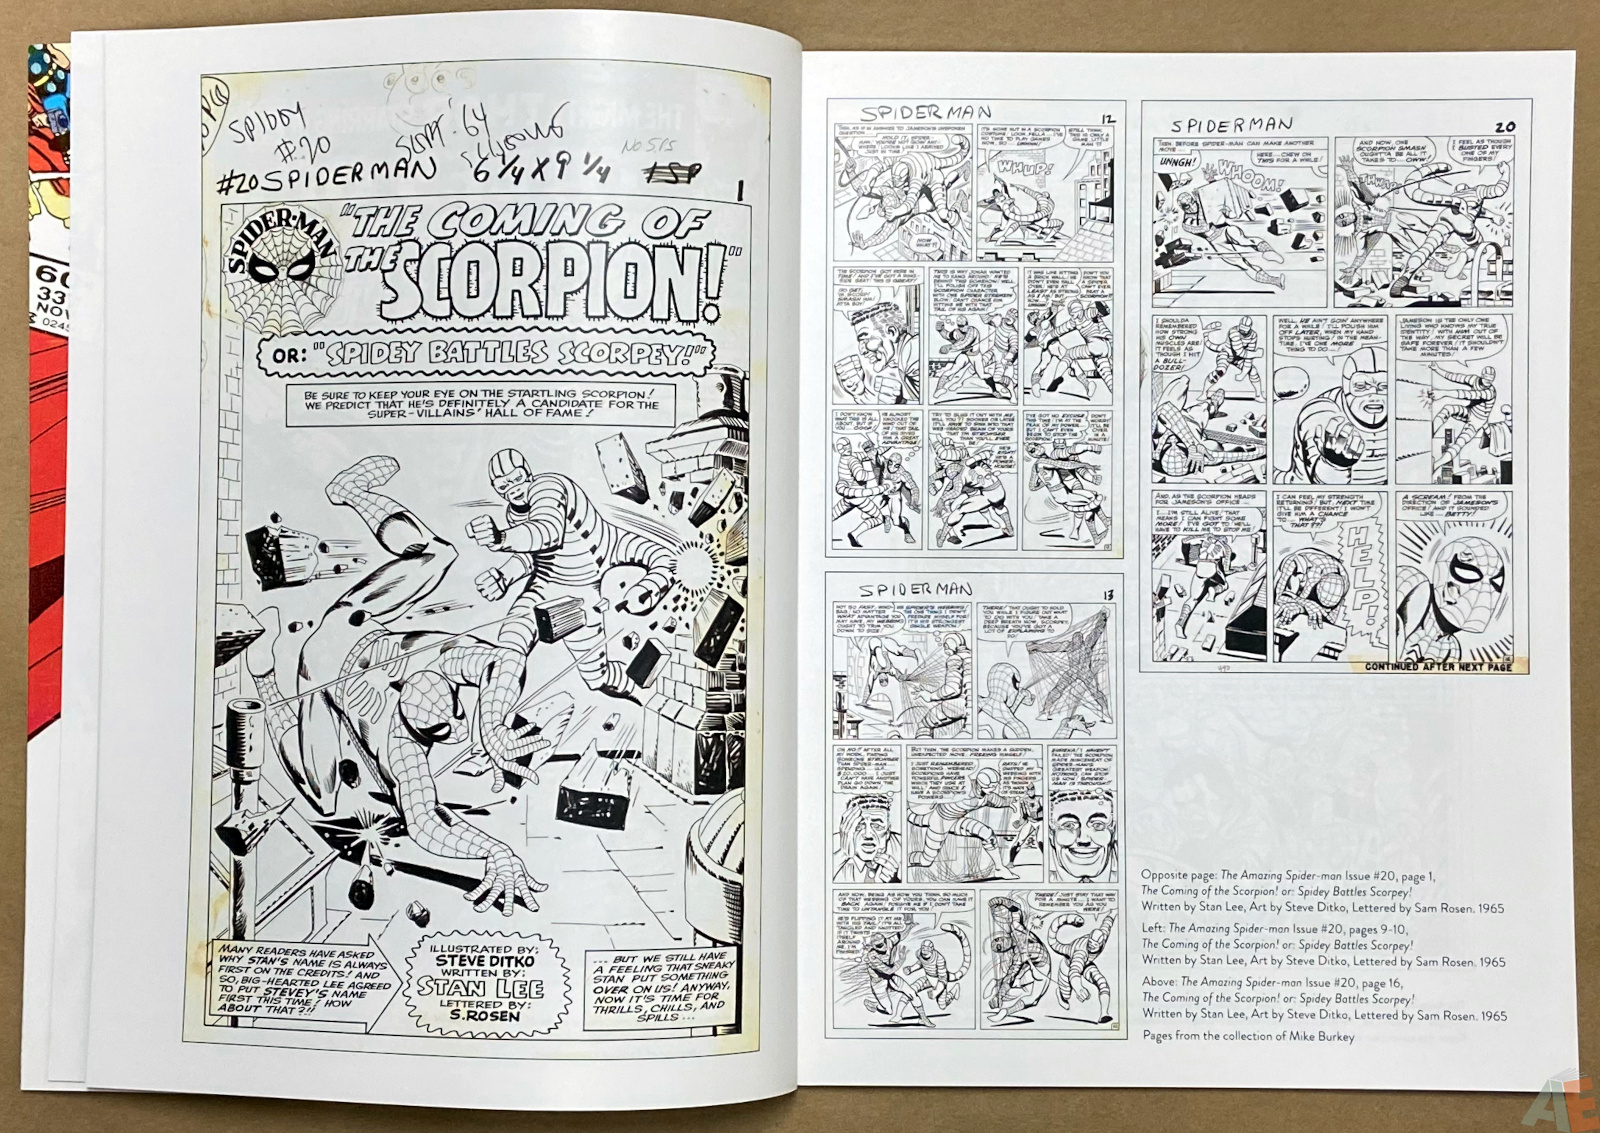 The Art of The Avengers and Other Heroes Exhibition Catalog interior 2